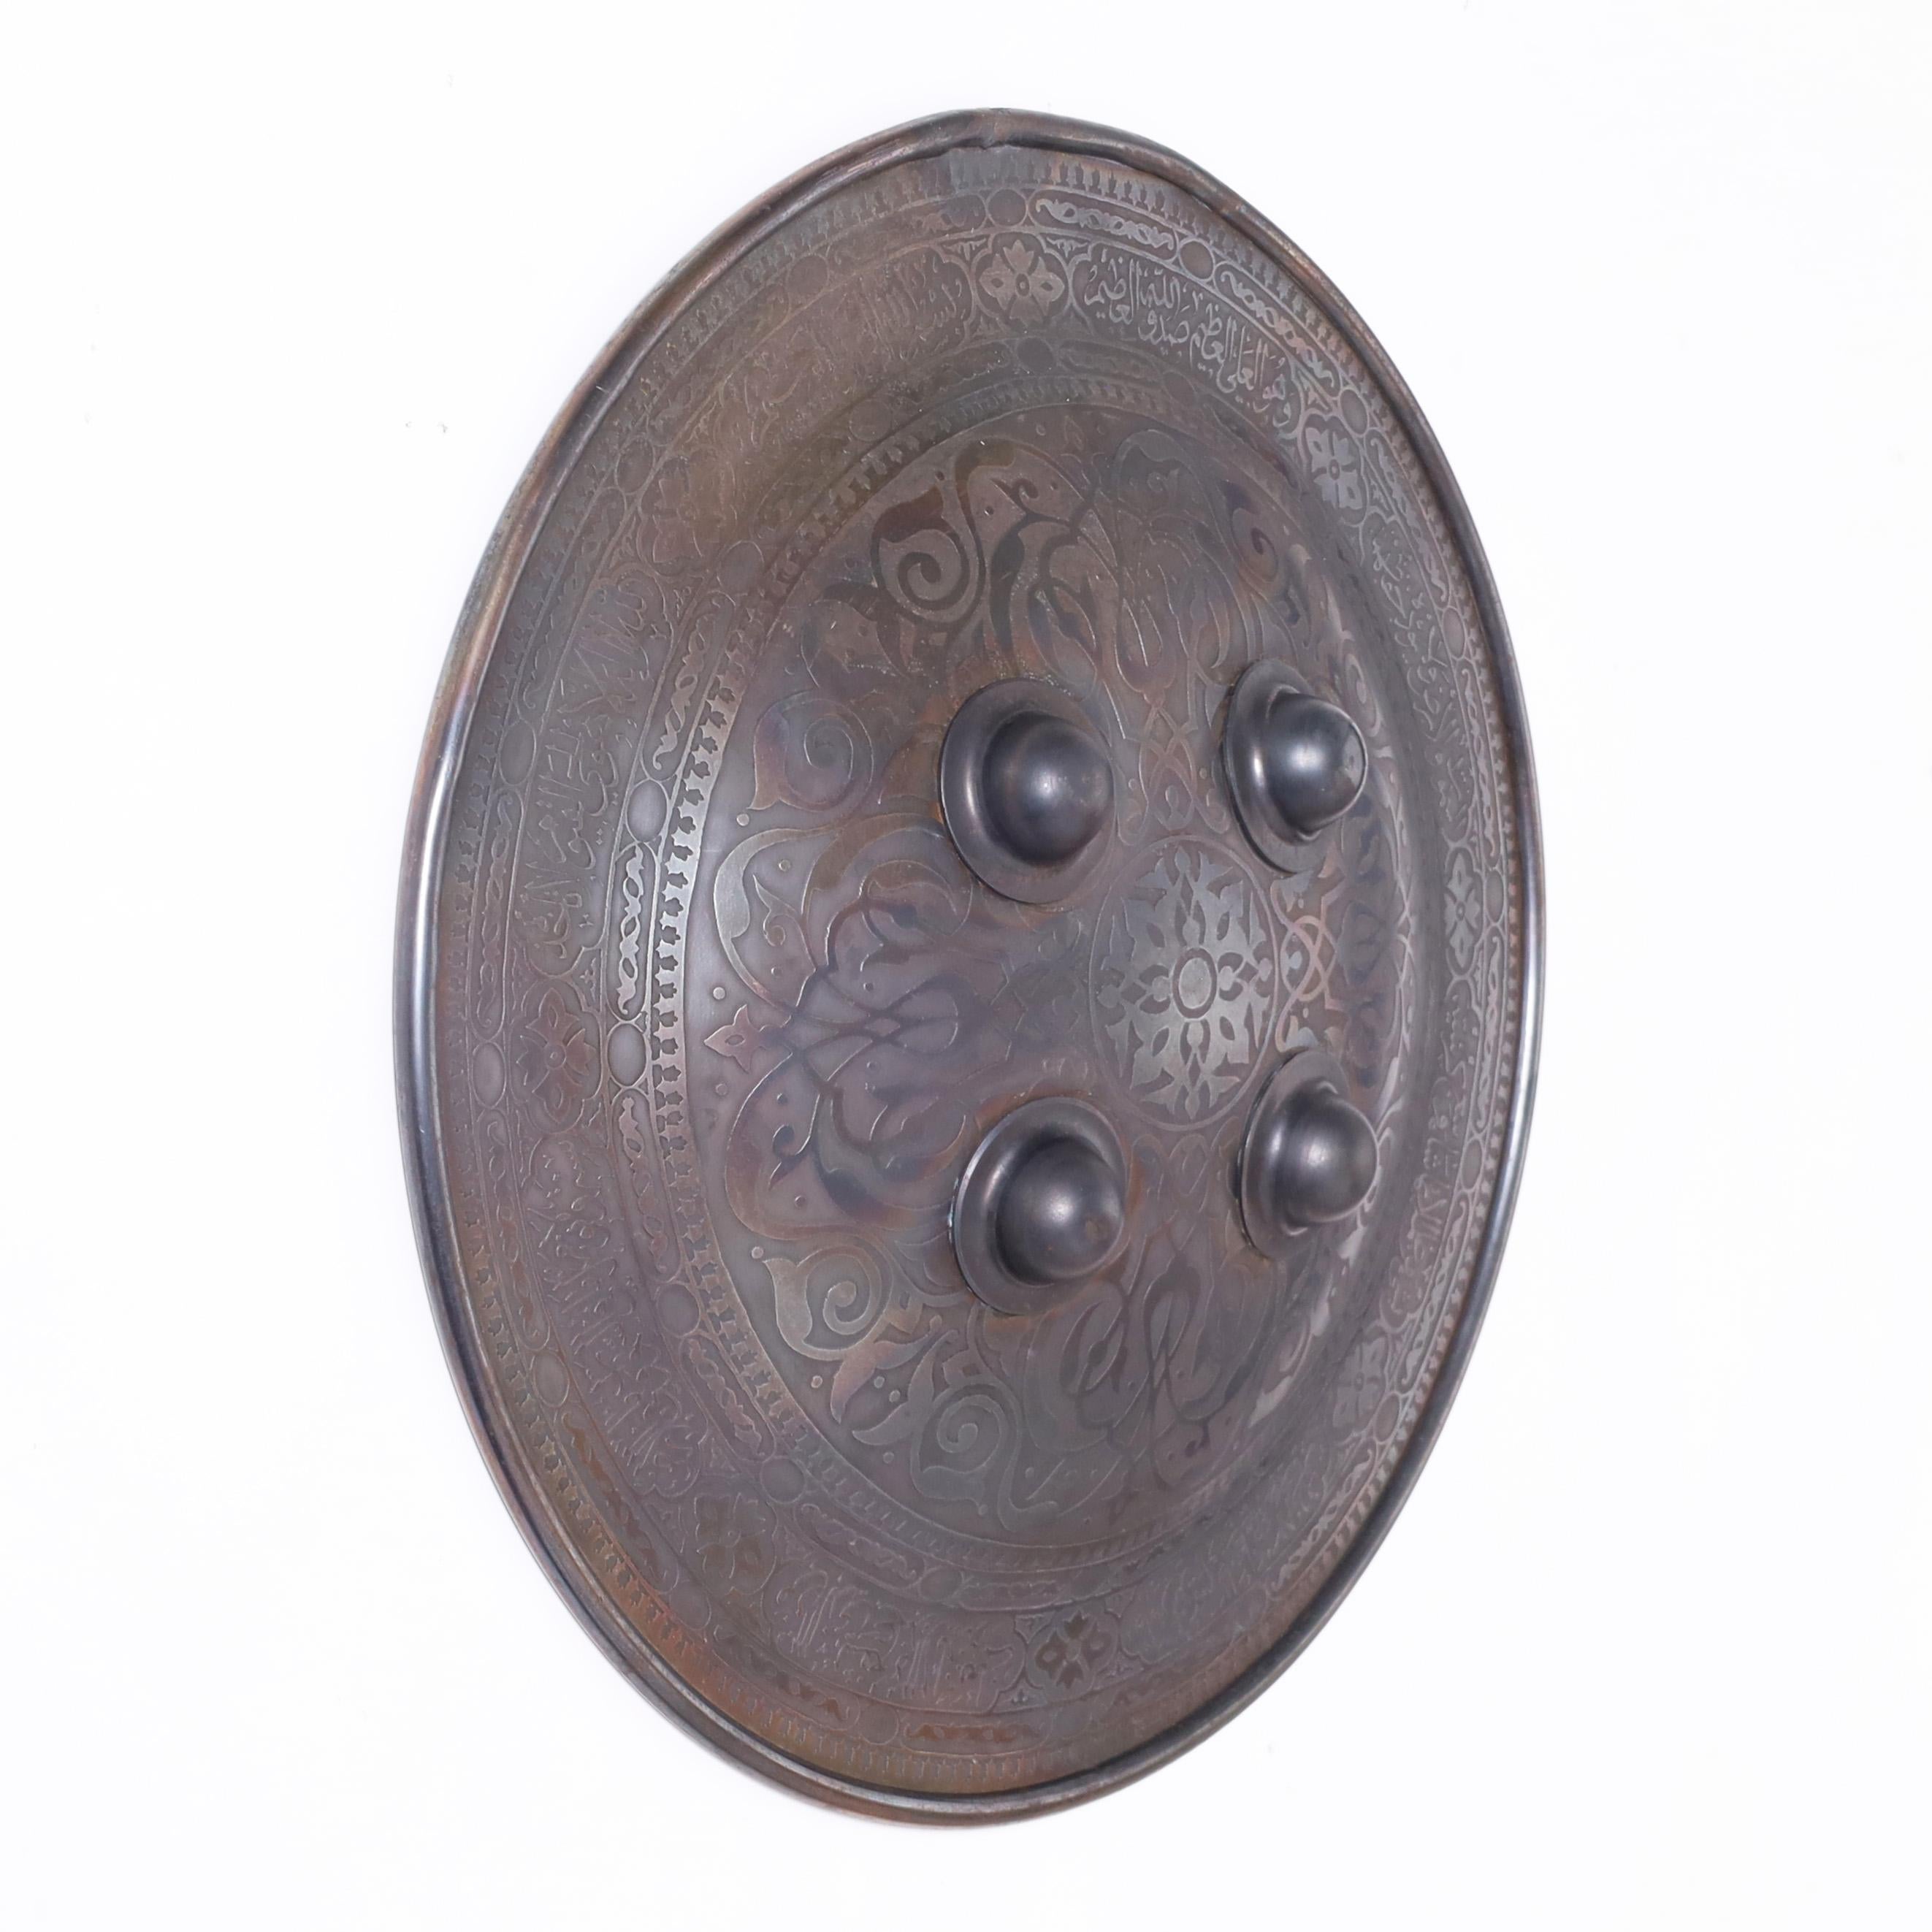 Transporting 19th century Persian Mughal shield crafted in iron and decorated in engraved floral designs and script.